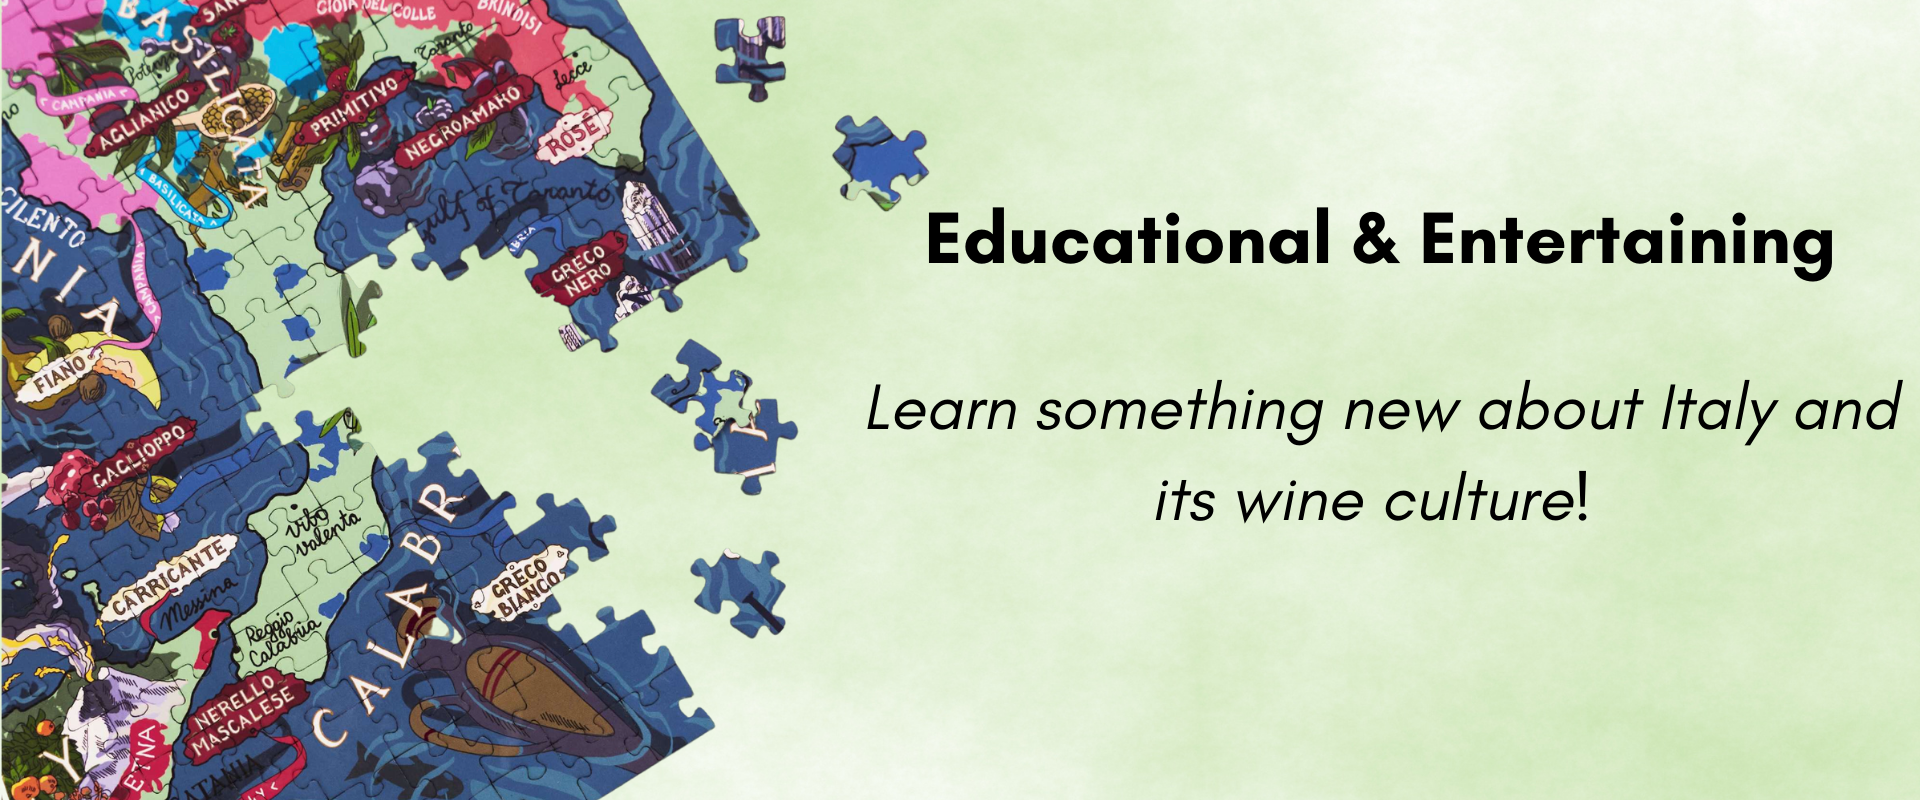 Learn something new about Italy and its wine culture! This wine puzzle is both educational and entertaining!